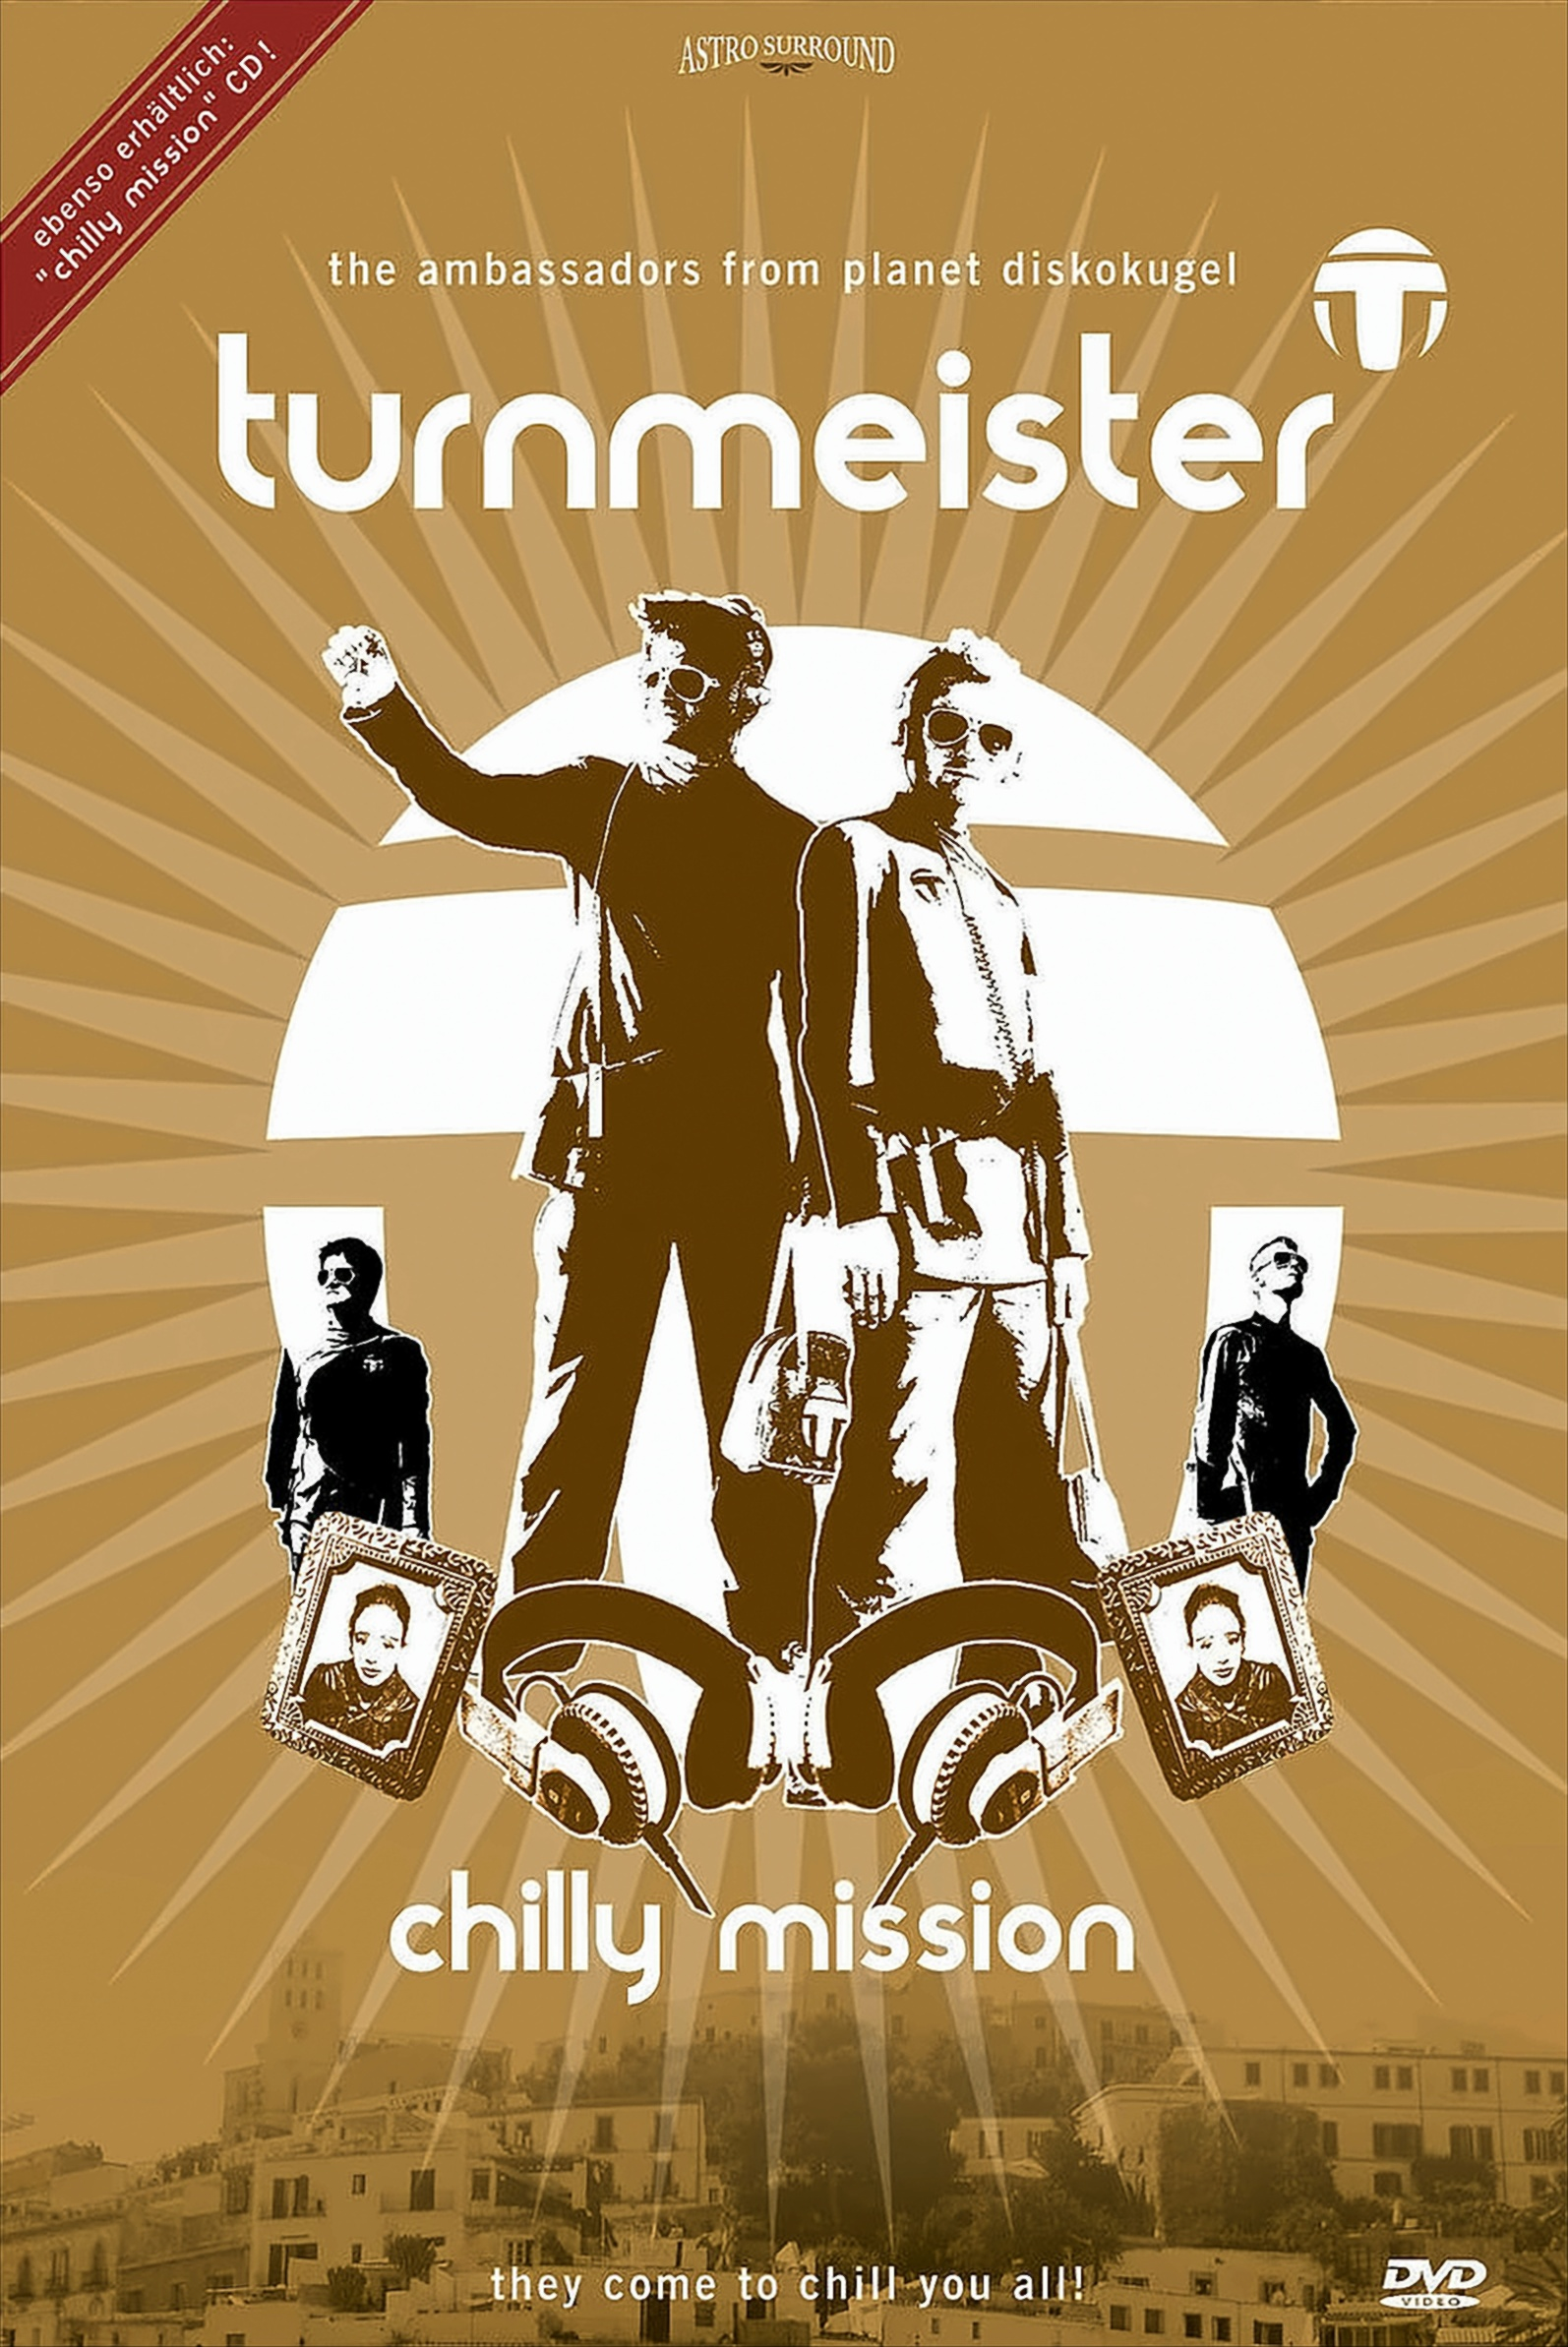 Turnmeister - Chilly DVD Mission